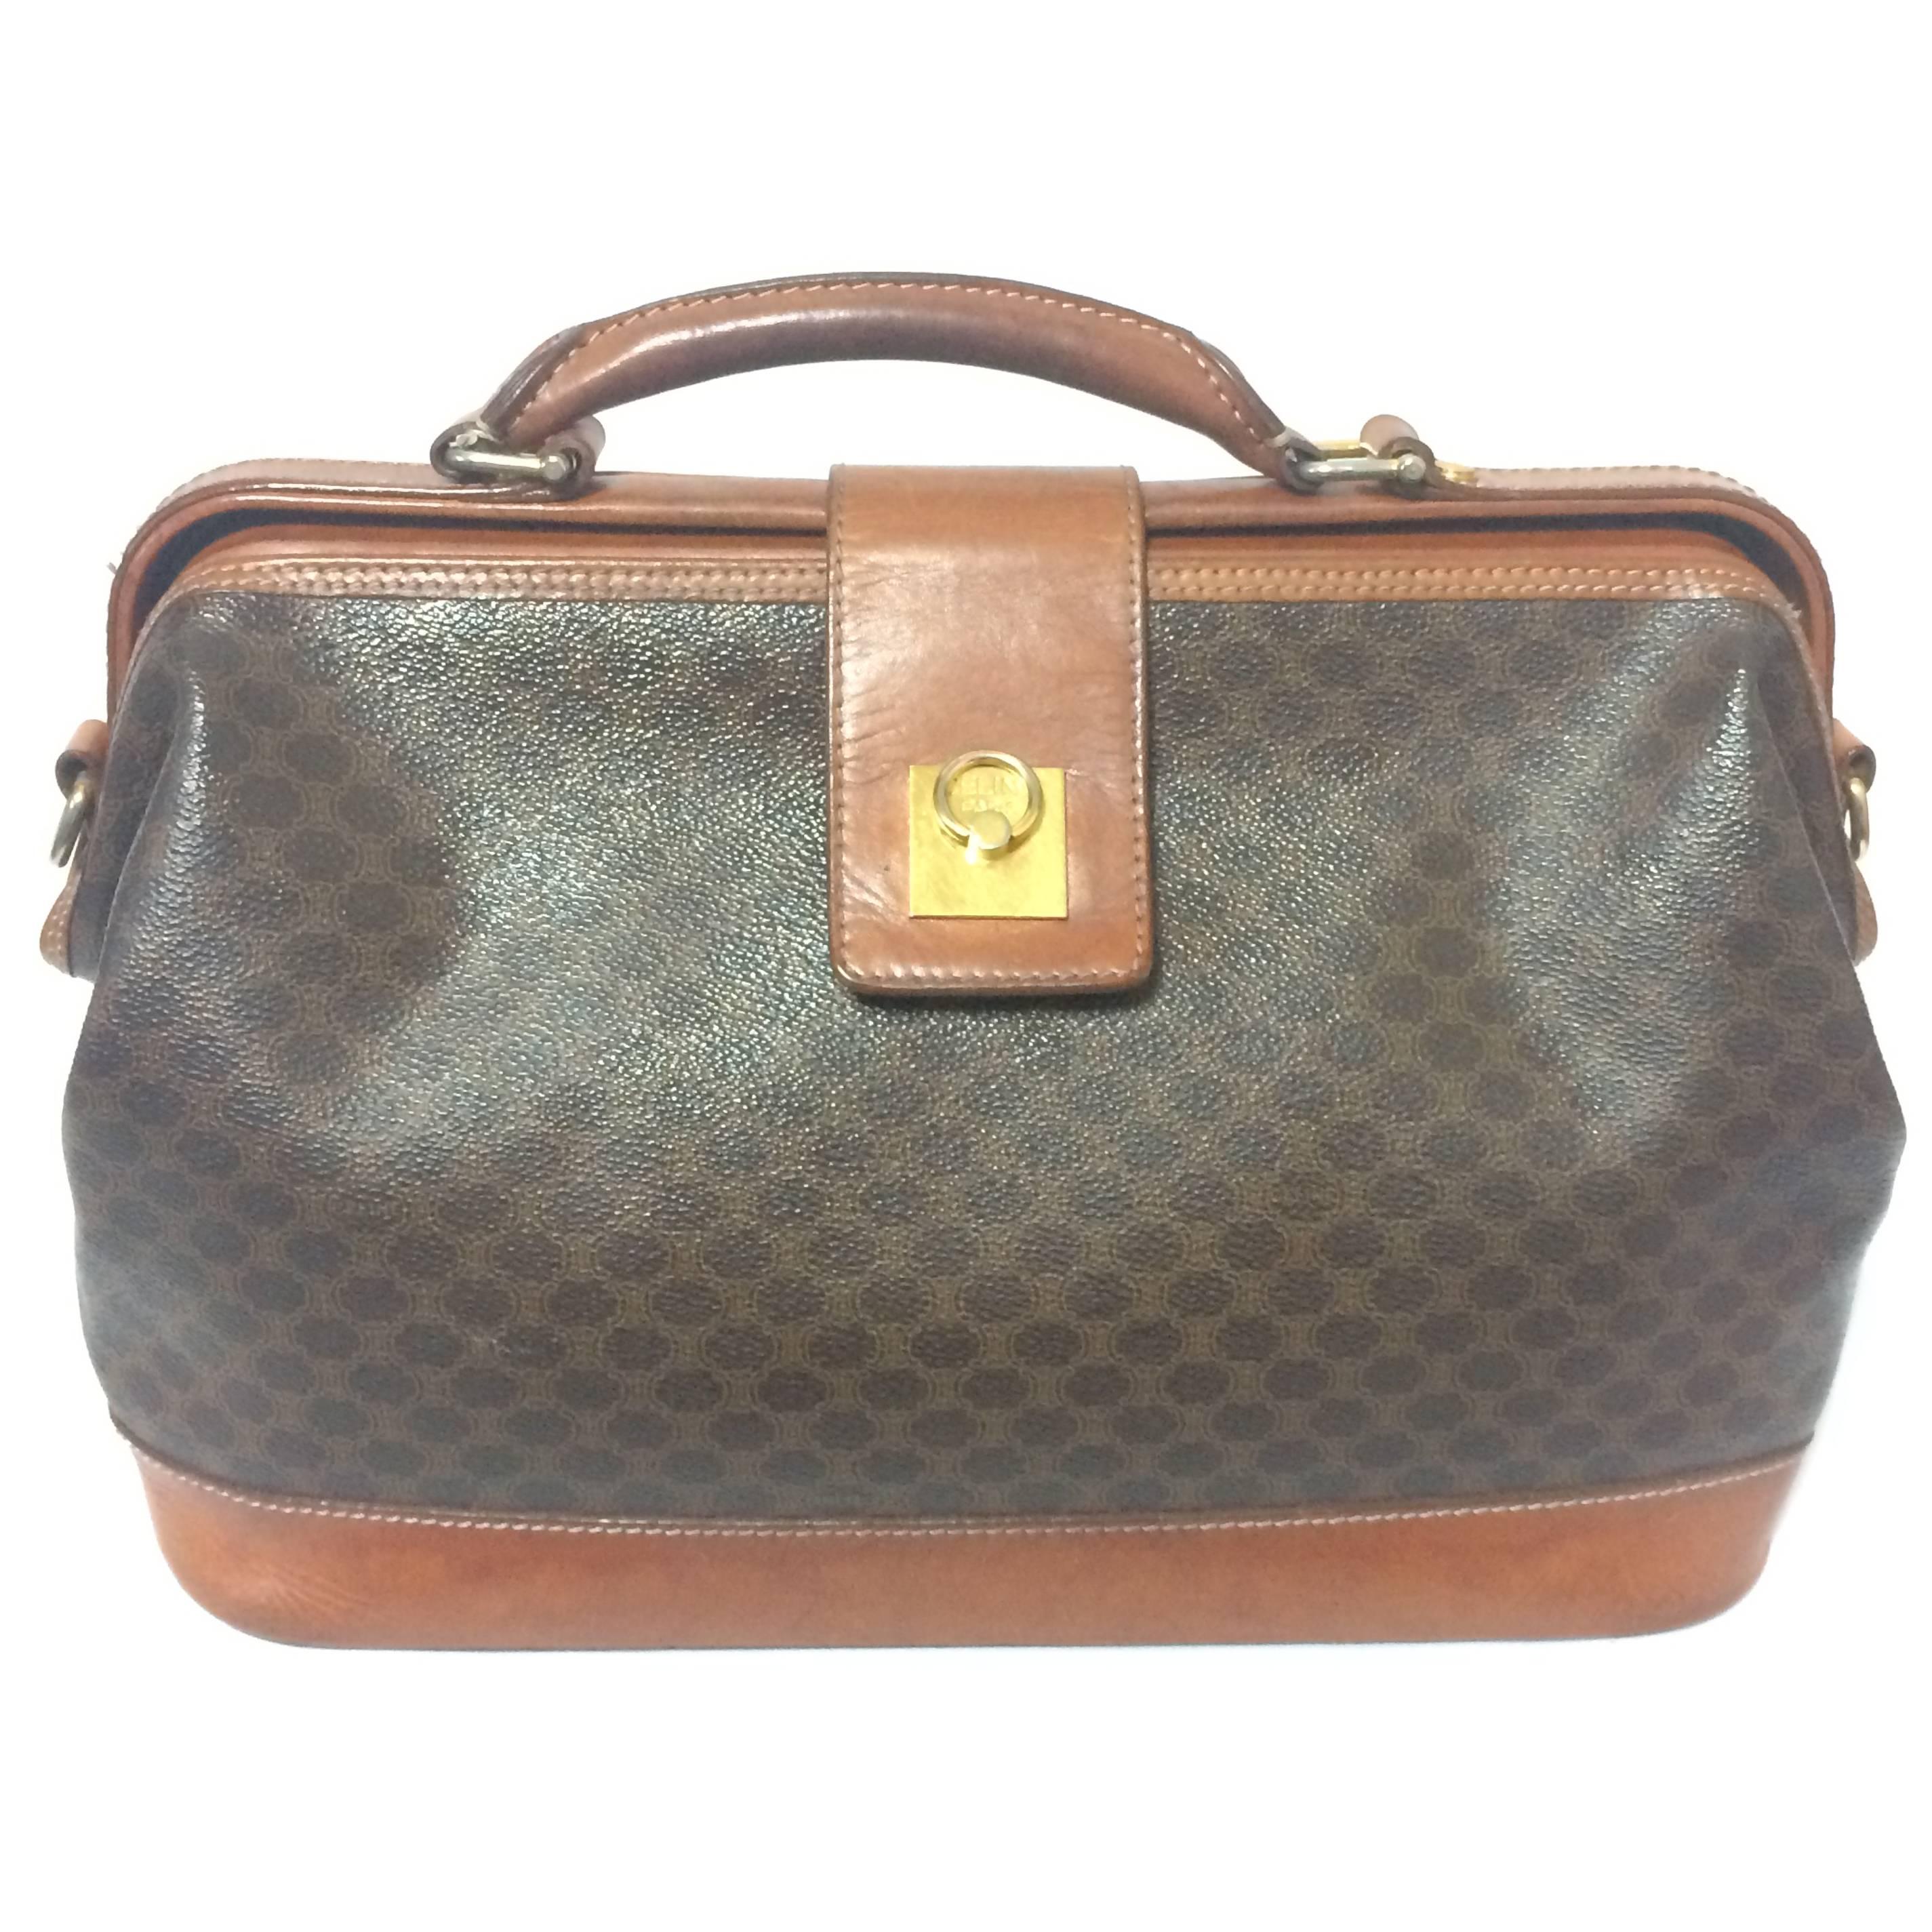 Vintage Celine brown macadam blaison doctor bag with brown leather trimmings. For Sale